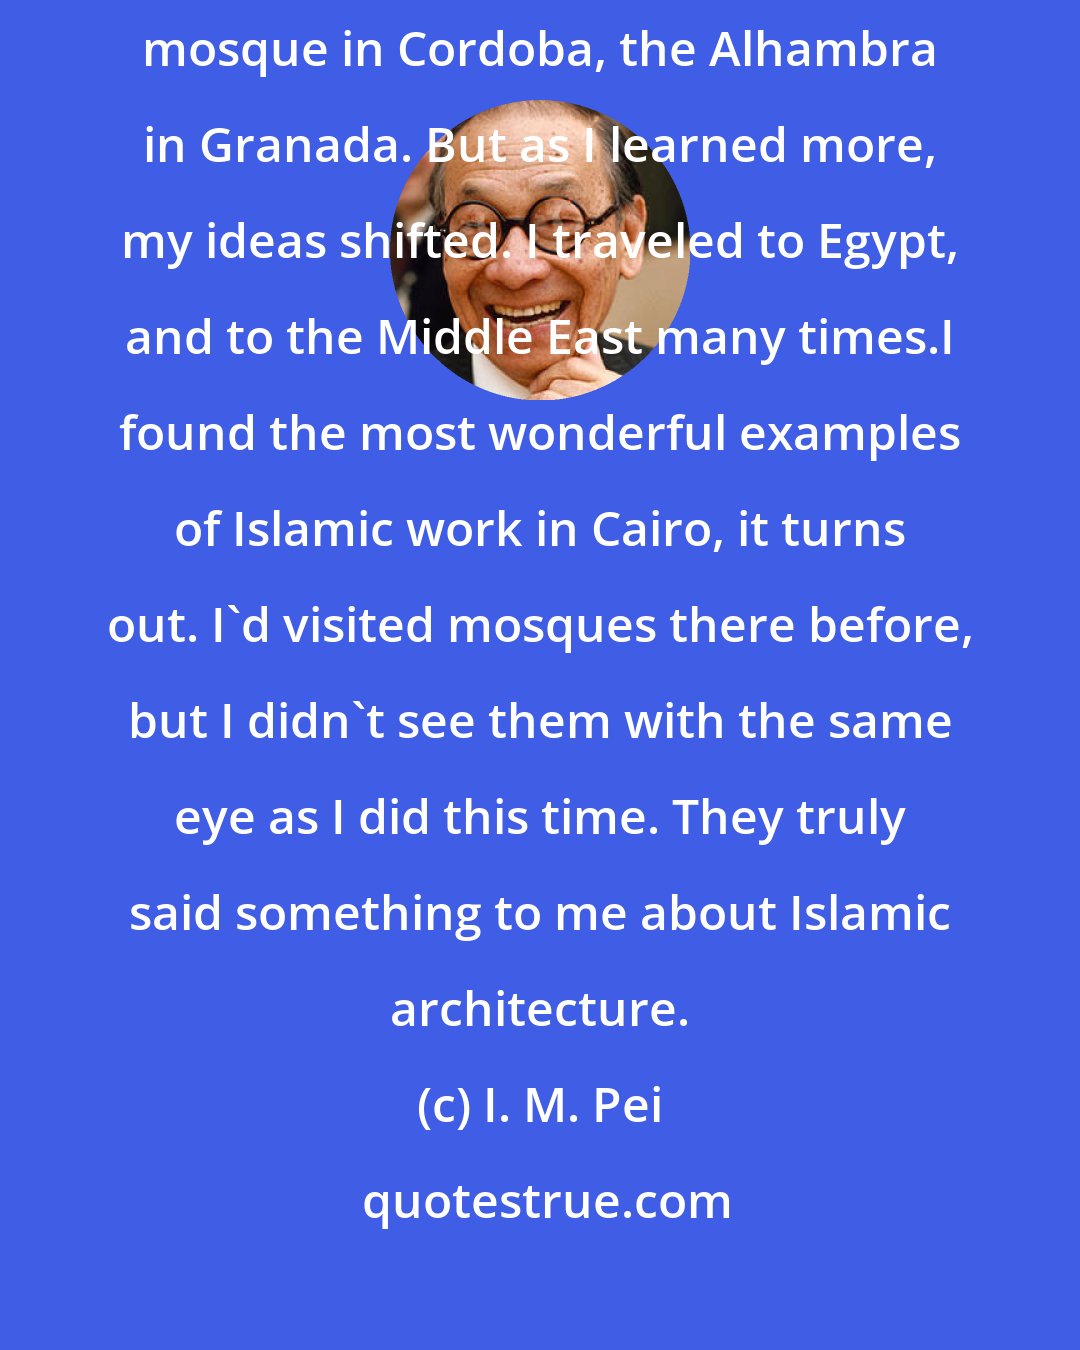 I. M. Pei: At the beginning, I thought the best Islamic work was in Spain - the mosque in Cordoba, the Alhambra in Granada. But as I learned more, my ideas shifted. I traveled to Egypt, and to the Middle East many times.I found the most wonderful examples of Islamic work in Cairo, it turns out. I'd visited mosques there before, but I didn't see them with the same eye as I did this time. They truly said something to me about Islamic architecture.